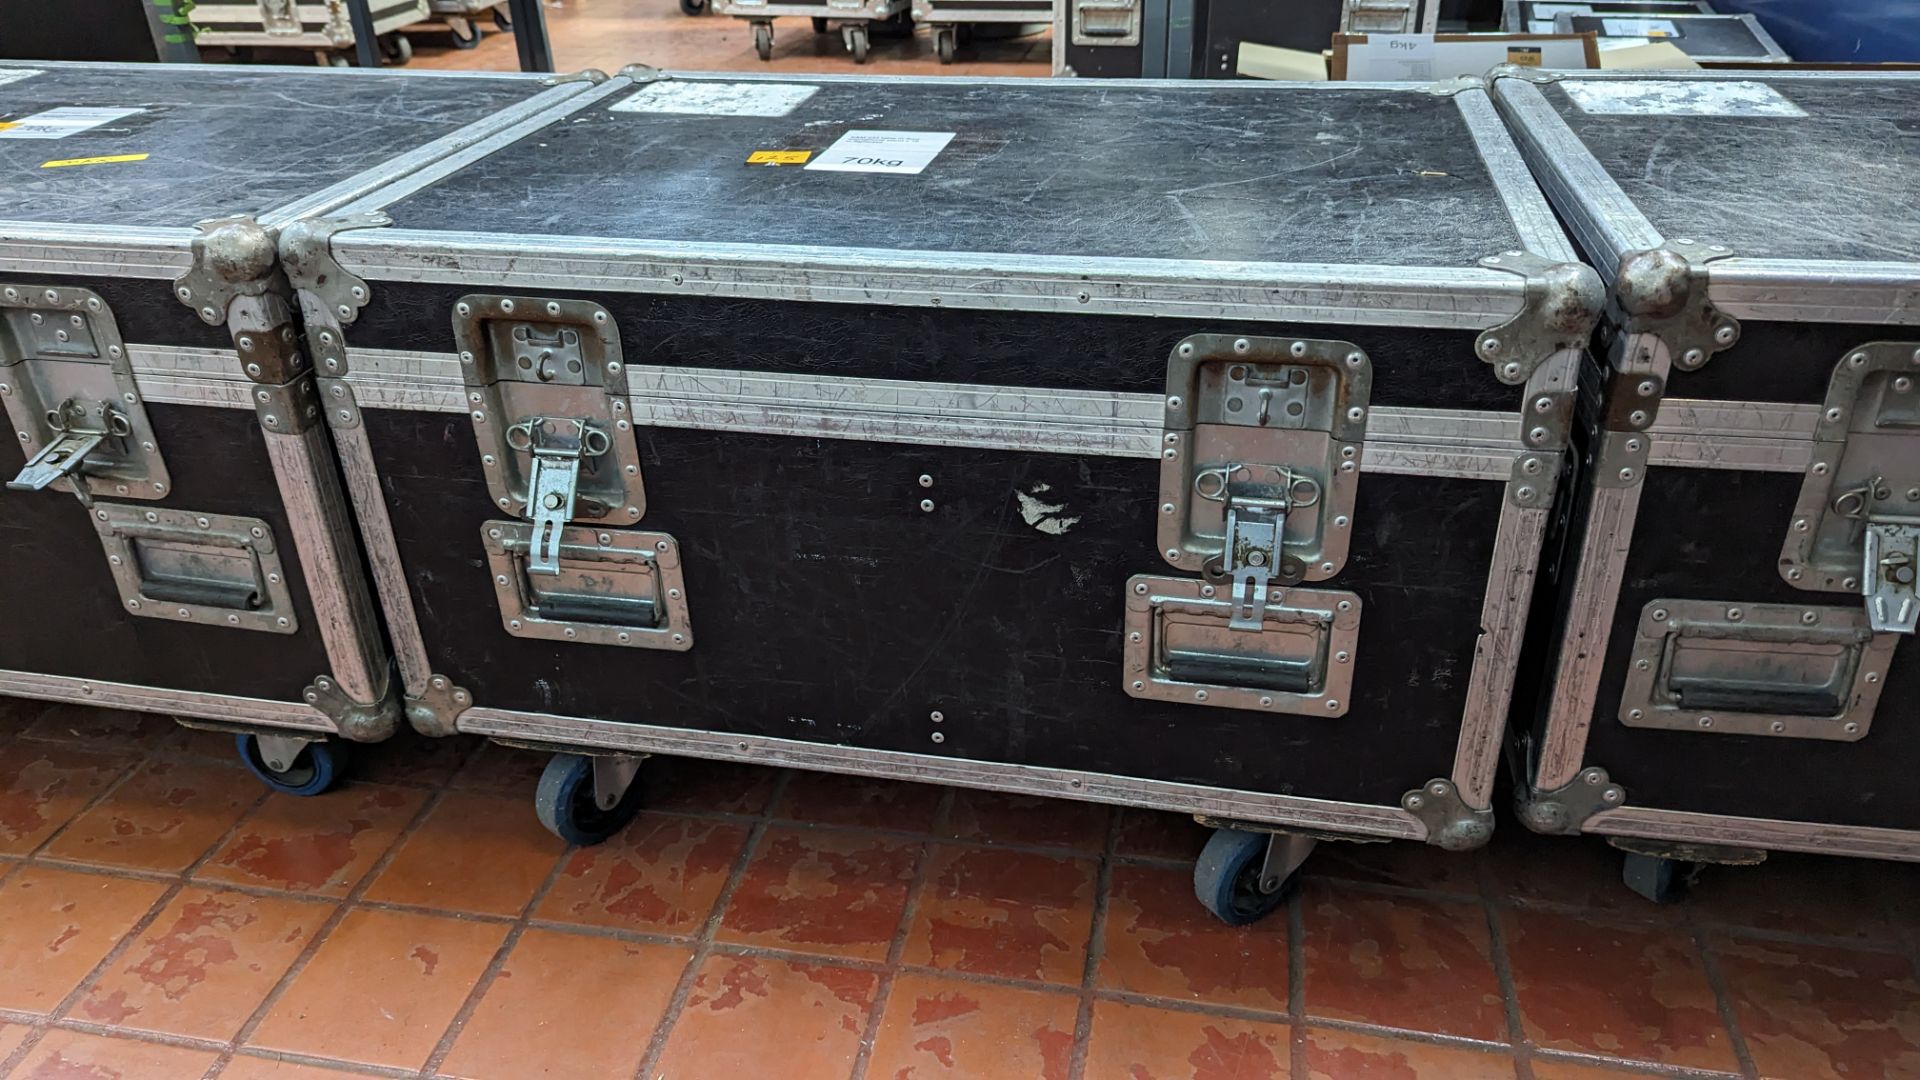 16 off K&M model 233 table or floor microphone stands, including flight case. Total lot weight: 70k - Image 7 of 7